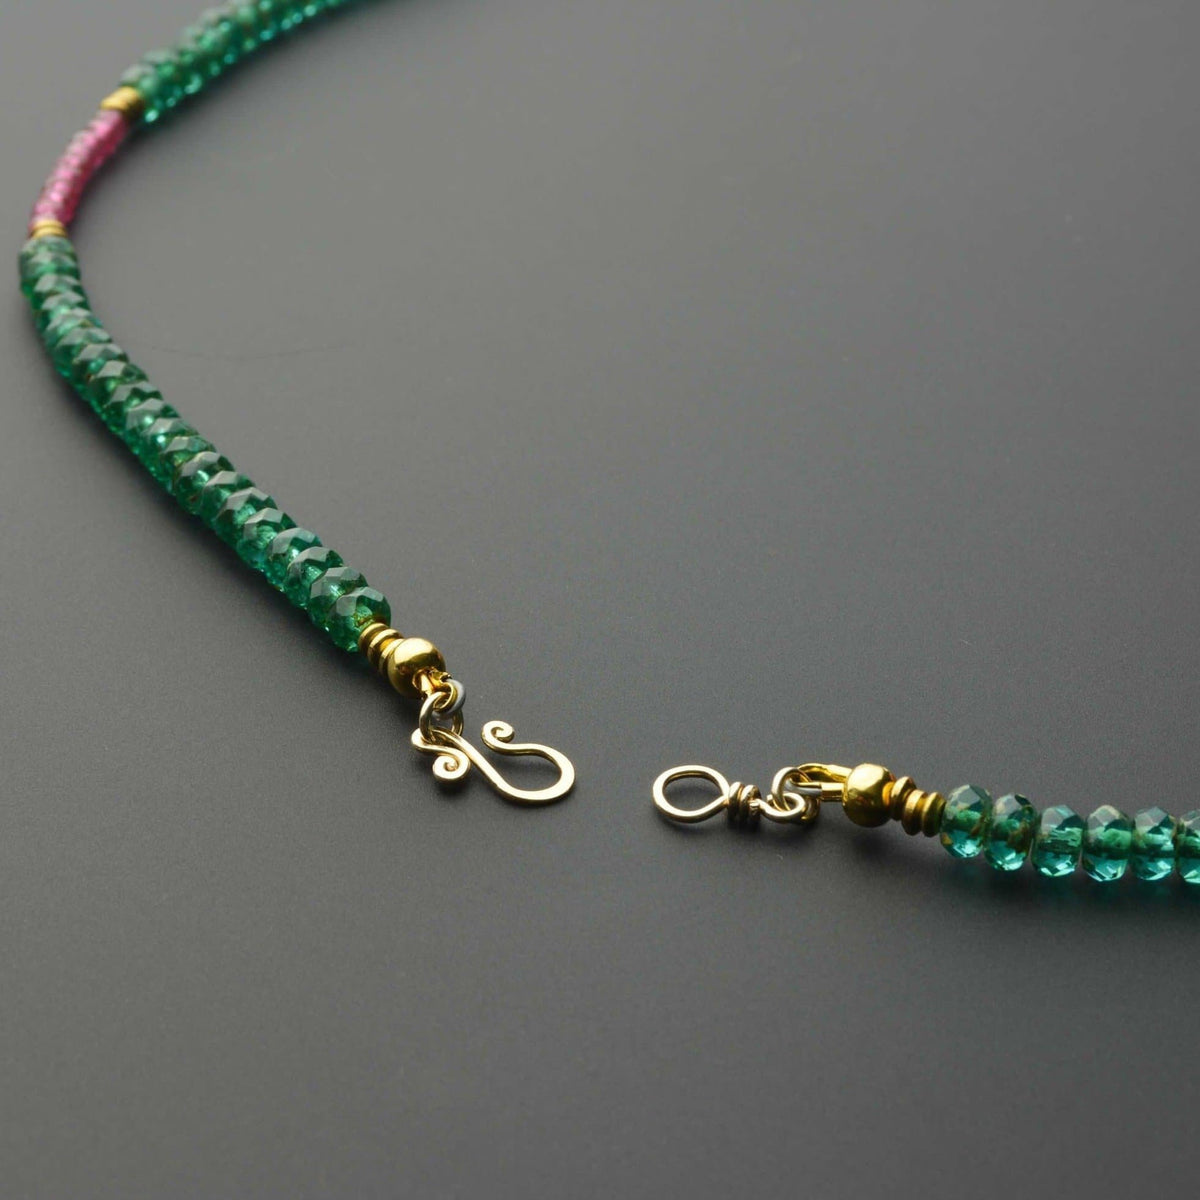 Afromillus golden Pendant with tourmaline and Czech beads | 